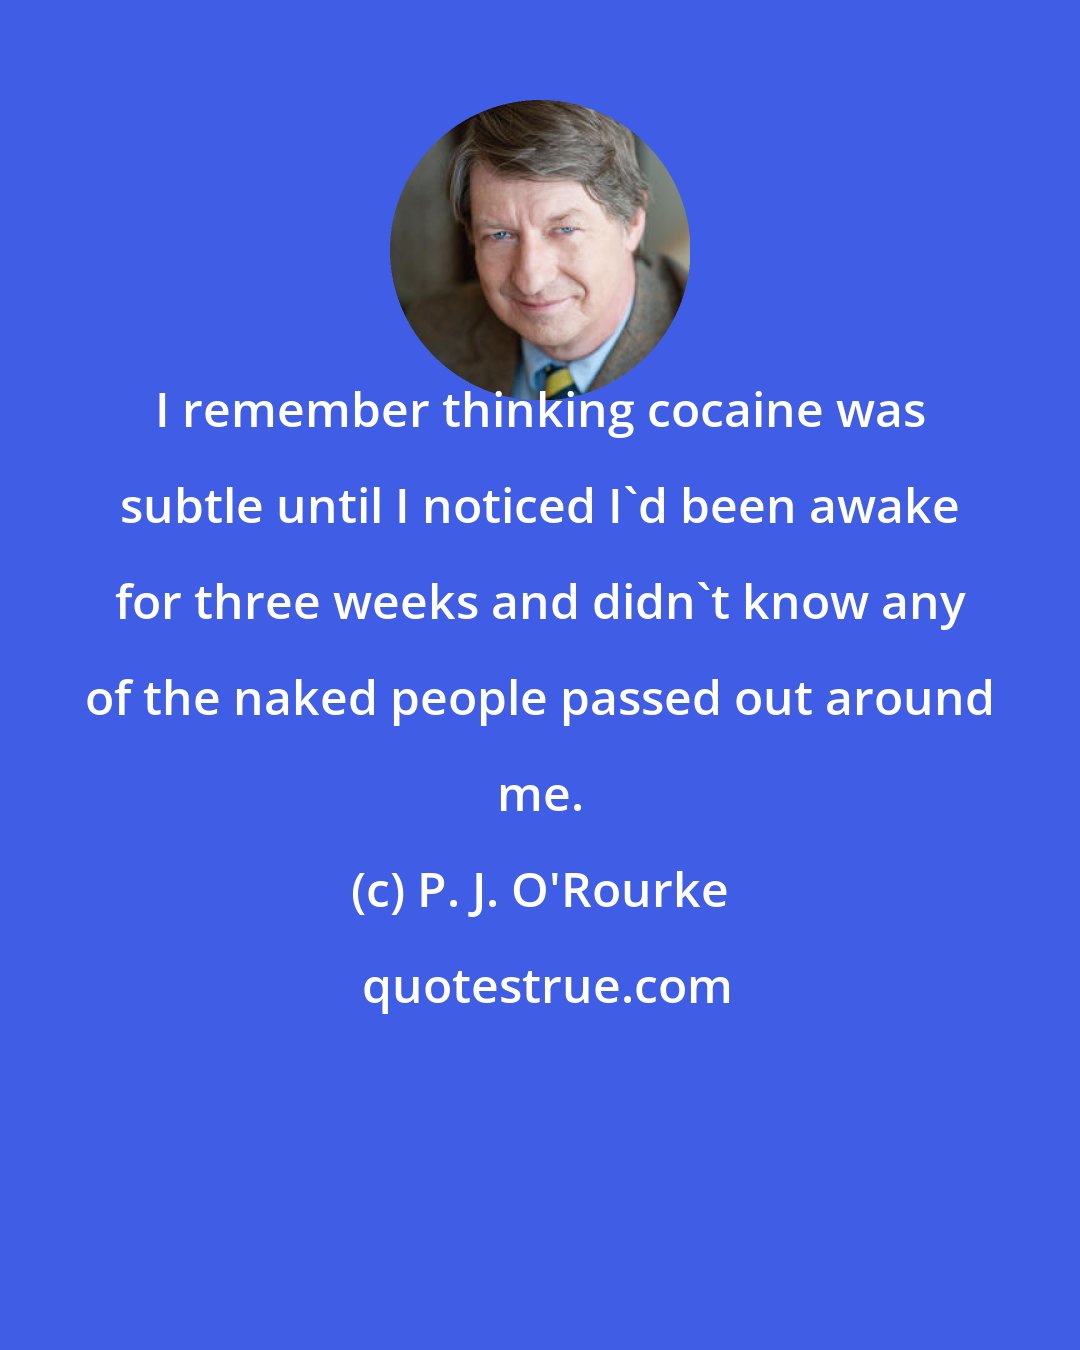 P. J. O'Rourke: I remember thinking cocaine was subtle until I noticed I'd been awake for three weeks and didn't know any of the naked people passed out around me.